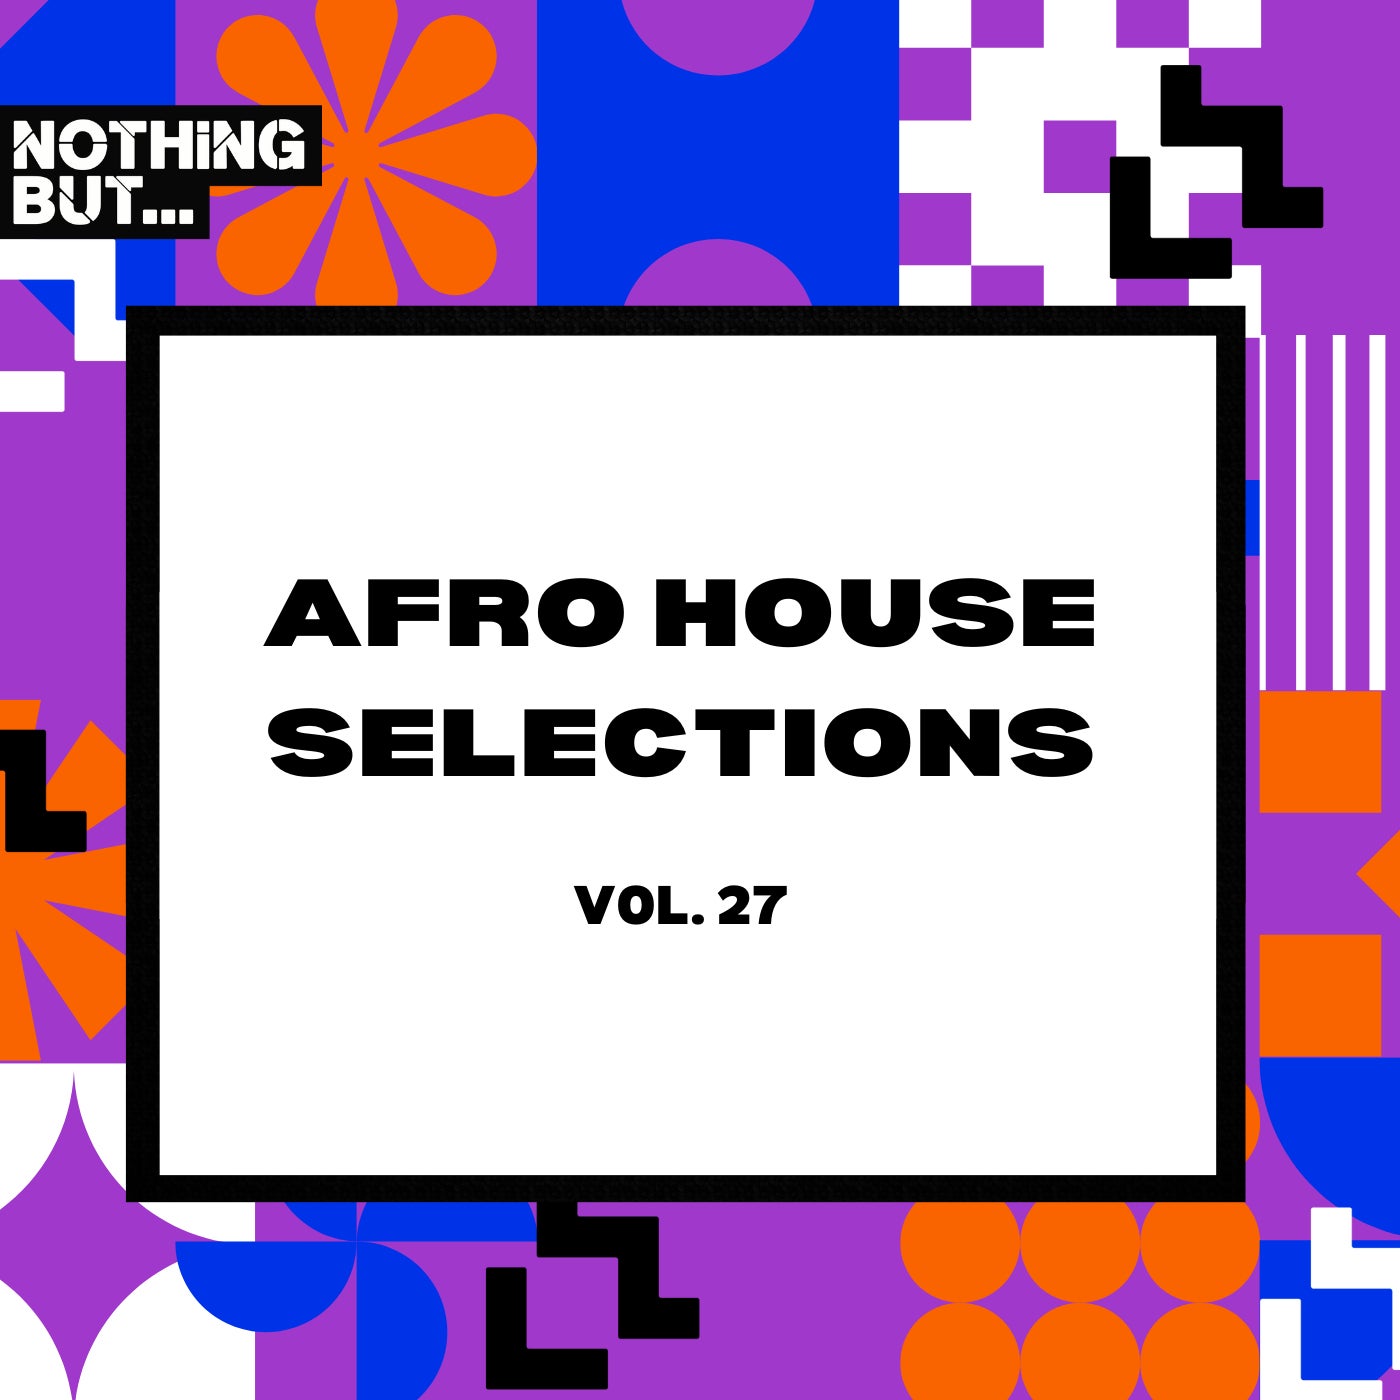 Nothing But... Afro House Selections, Vol. 27